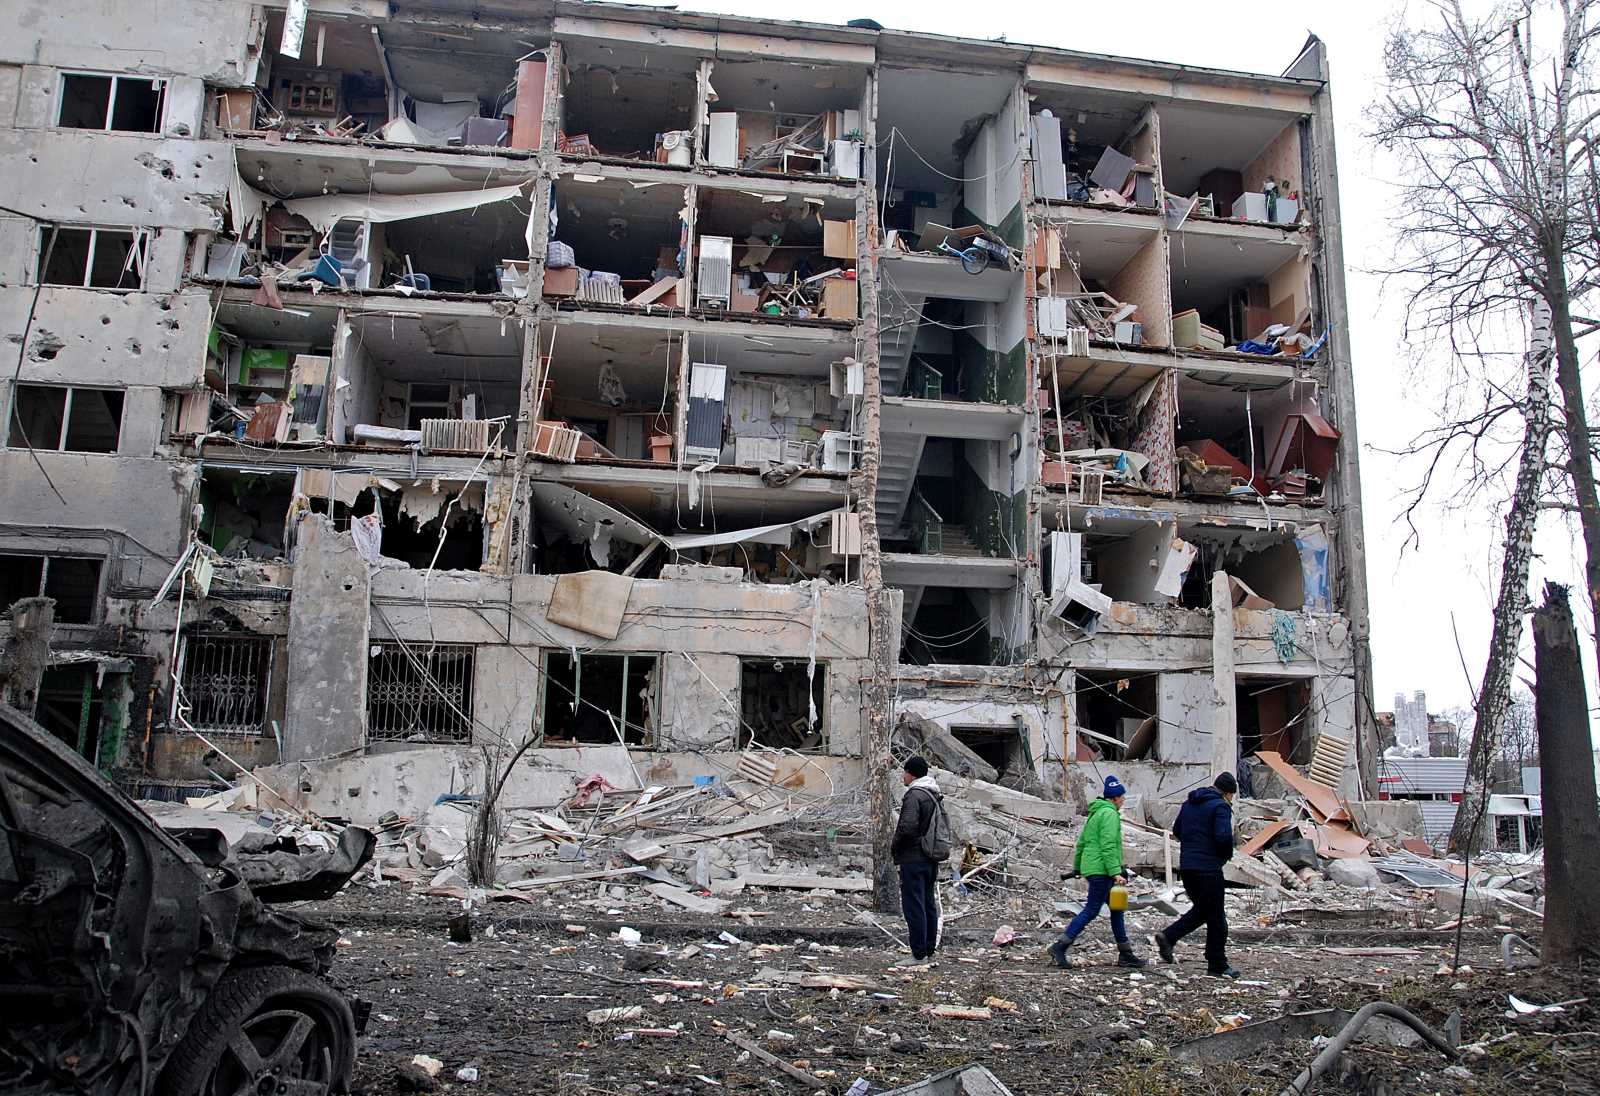 “Russia’s attack on Ukraine is atrocious. Full stop.” Destroyed apartment building in Kharkiv.